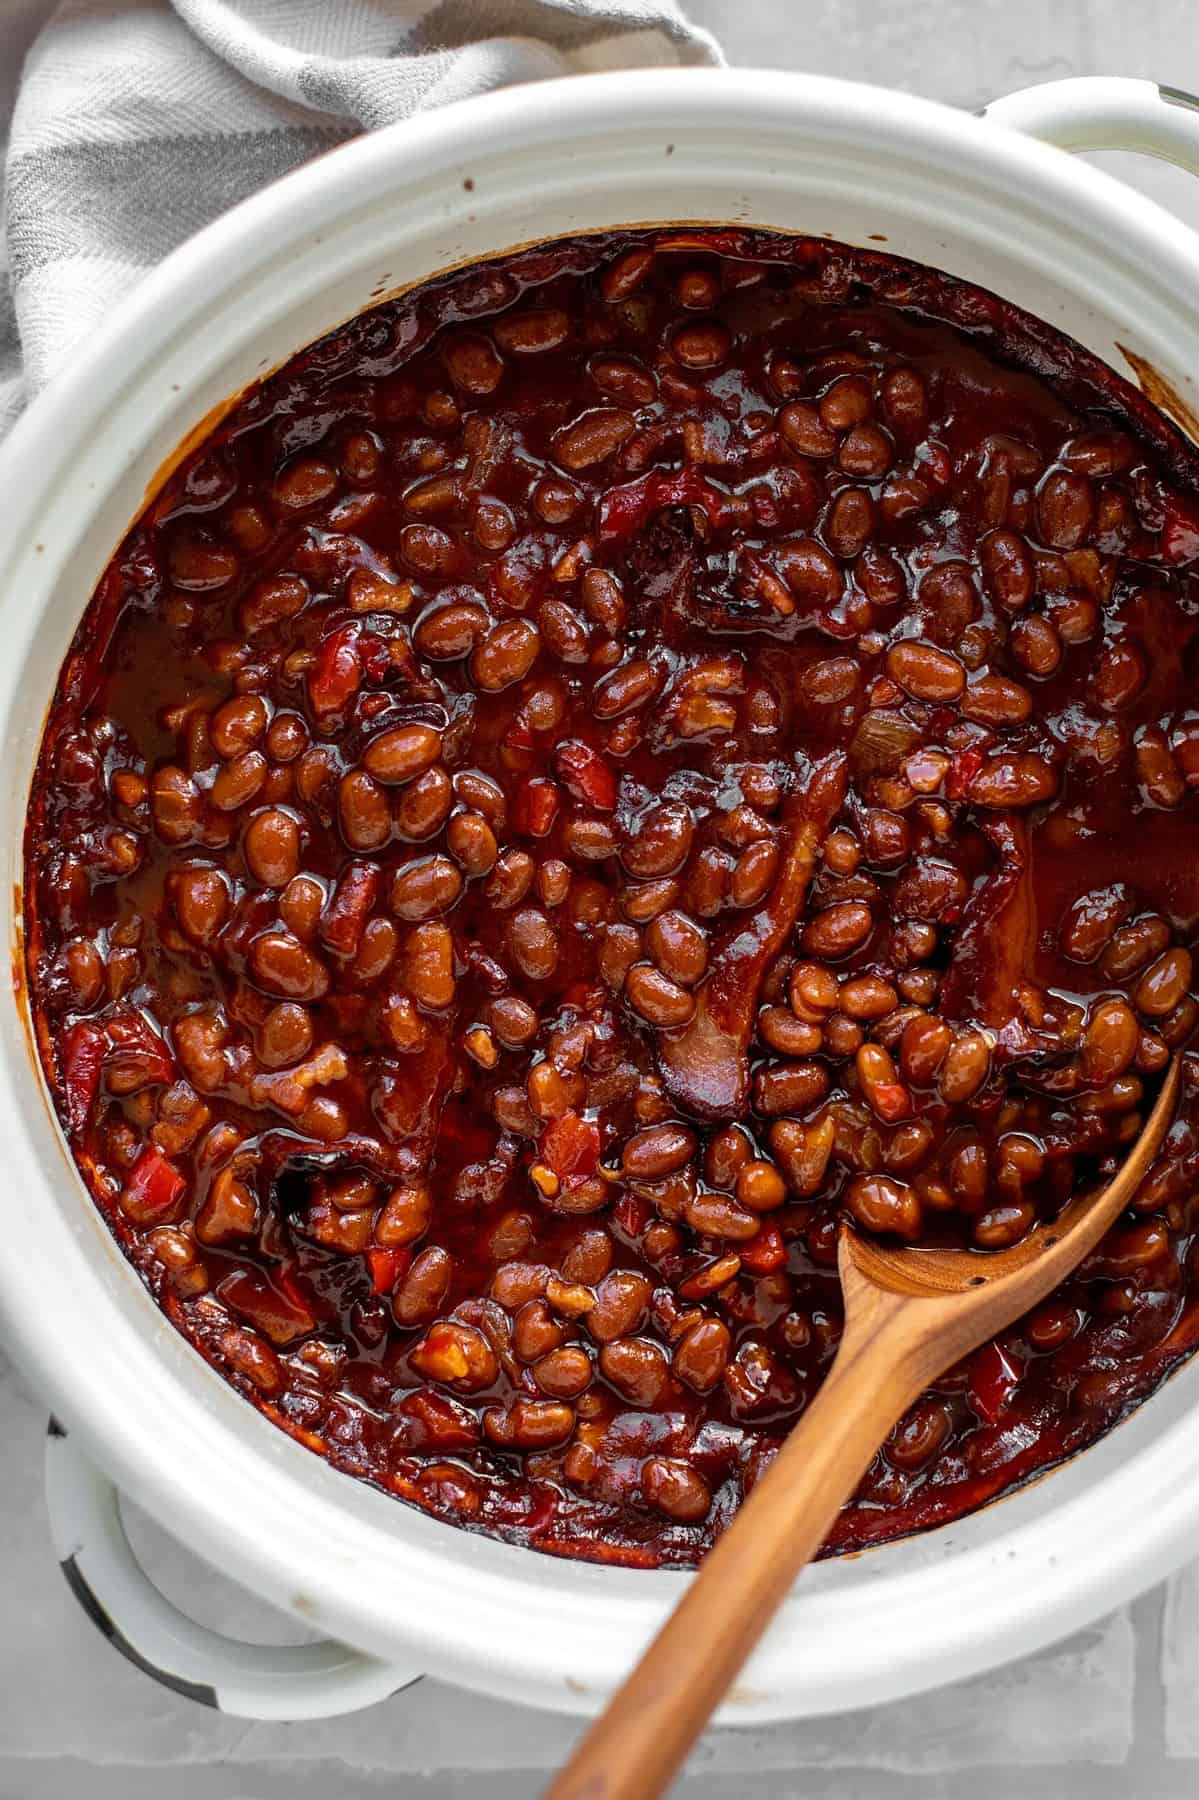  These beans have so much smoky flavor, you won't be able to resist a second helping.